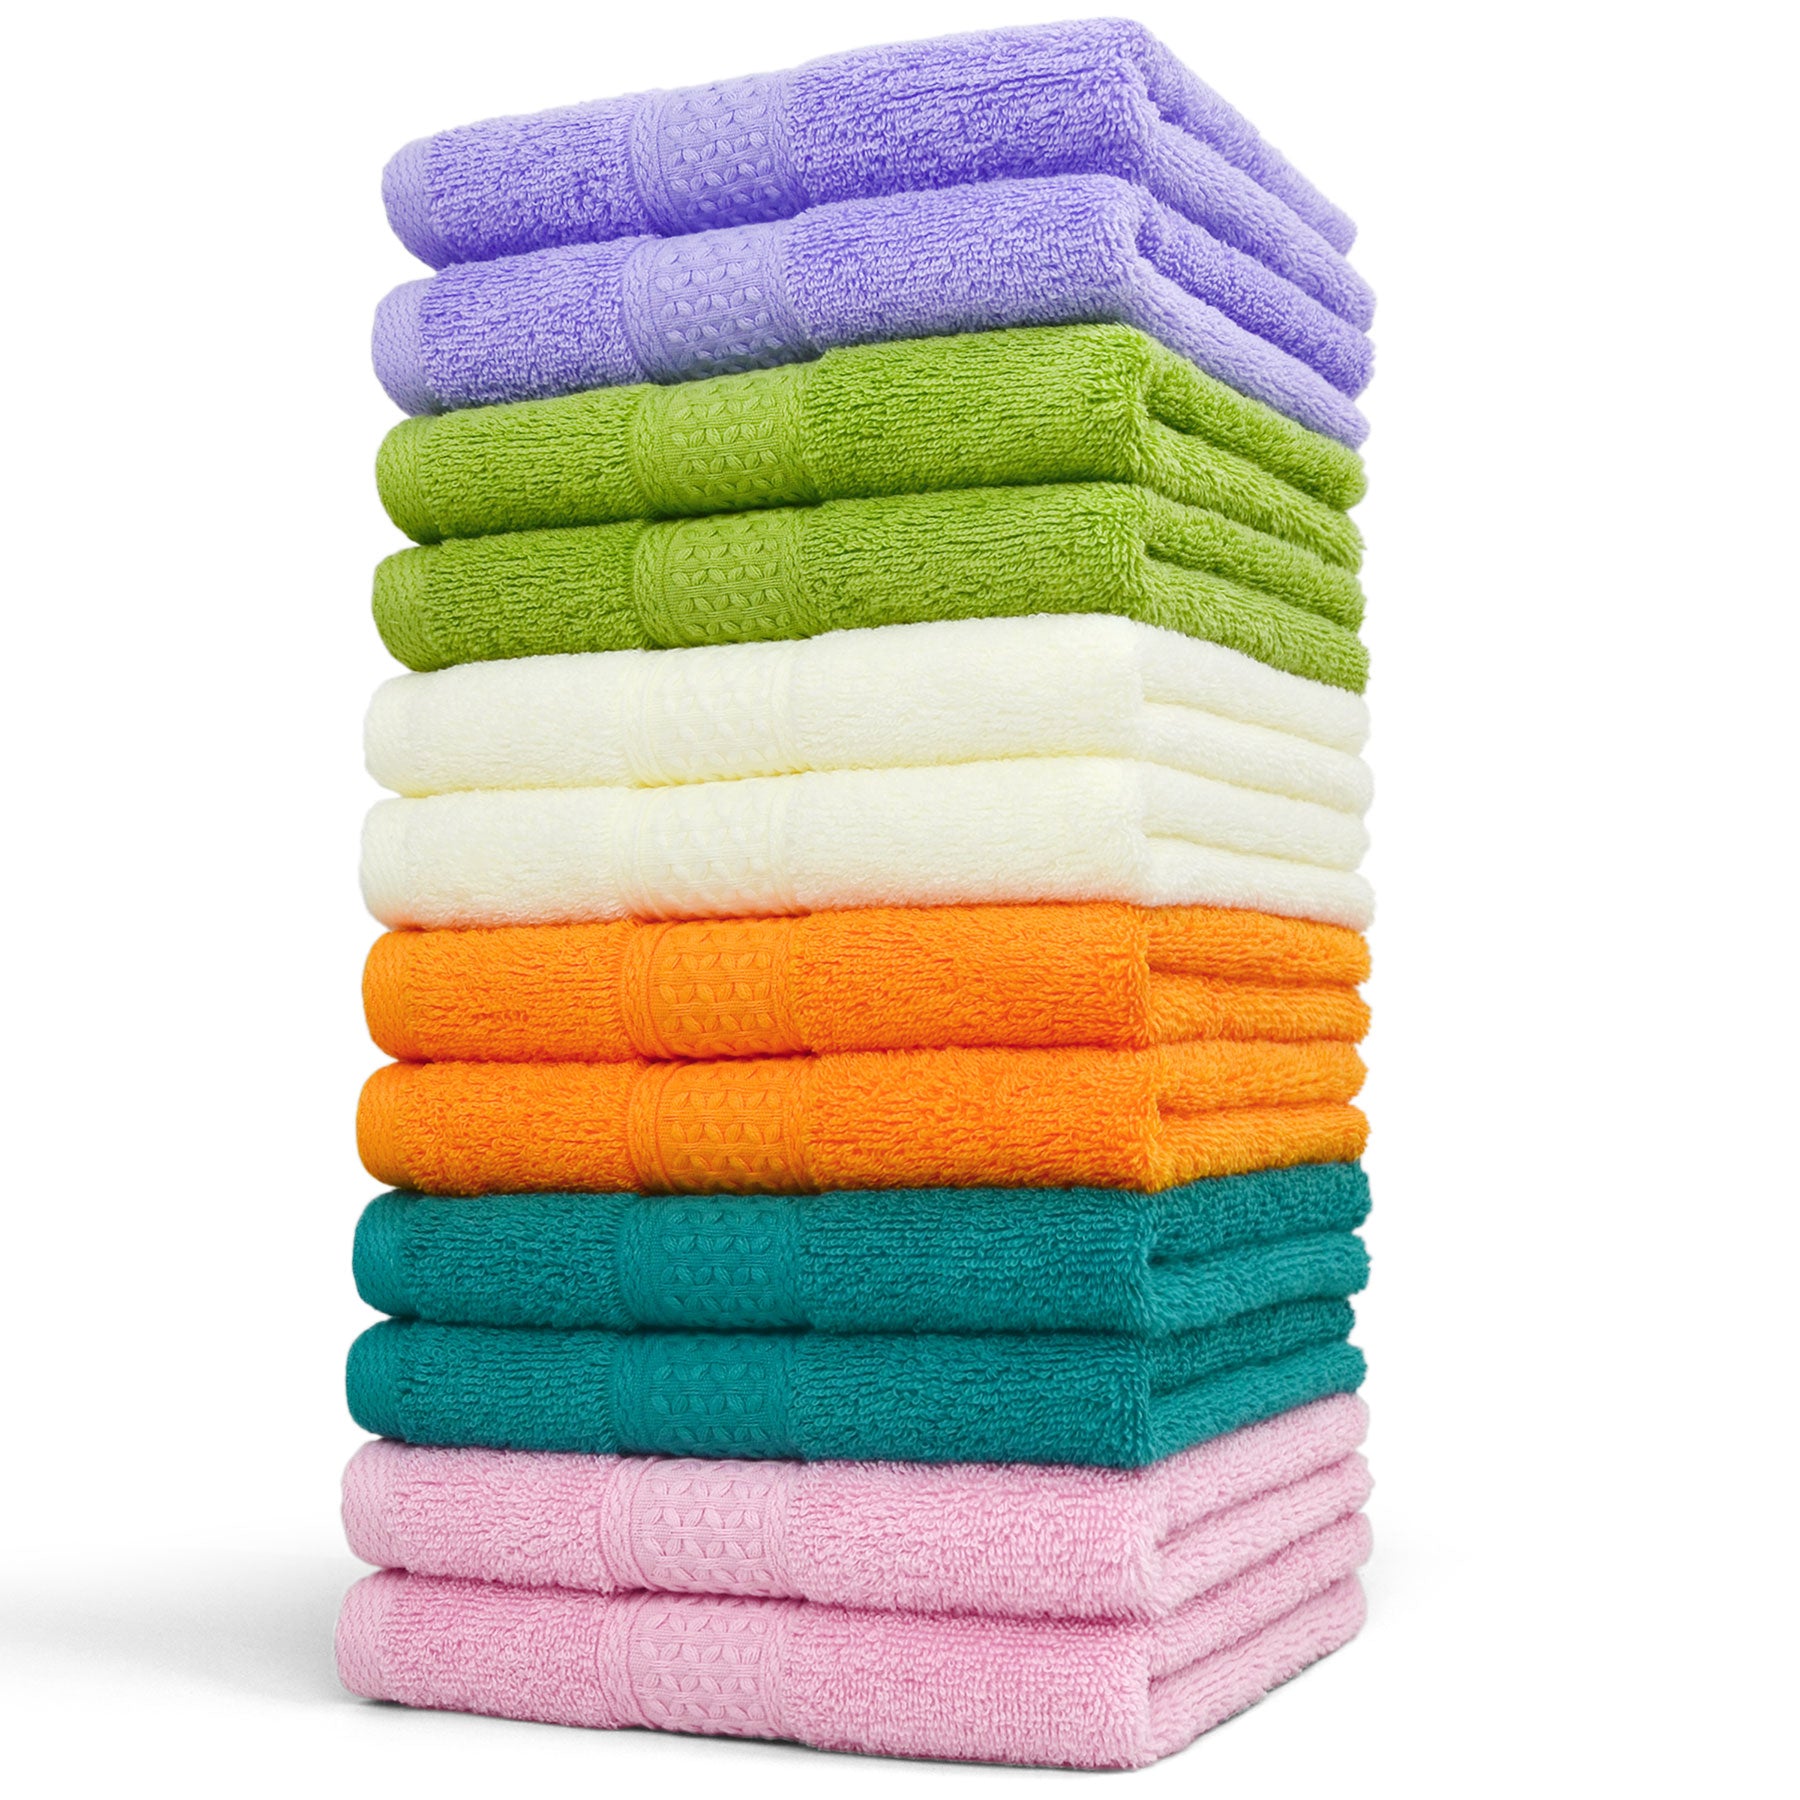 Cleanbear Face Cloths 12 Pack Washcloths 100% Cotton Wash Cloth for Fa